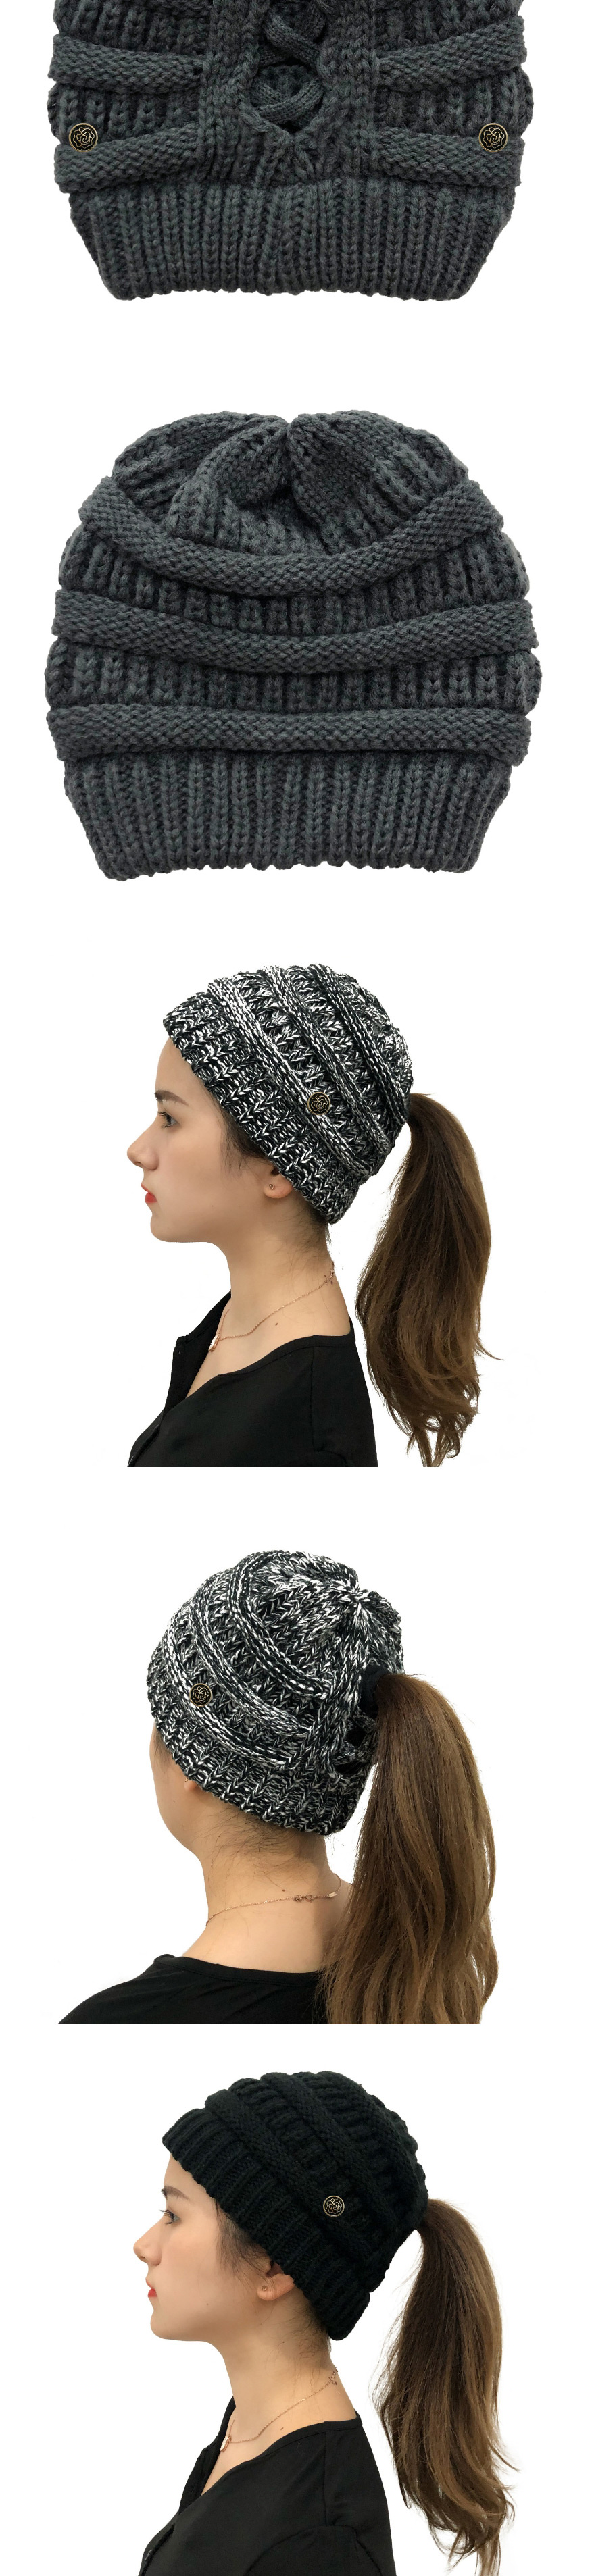 Fashion Meter Button Detachable Cross-back Ponytail Knitted Hat,Knitting Wool Hats